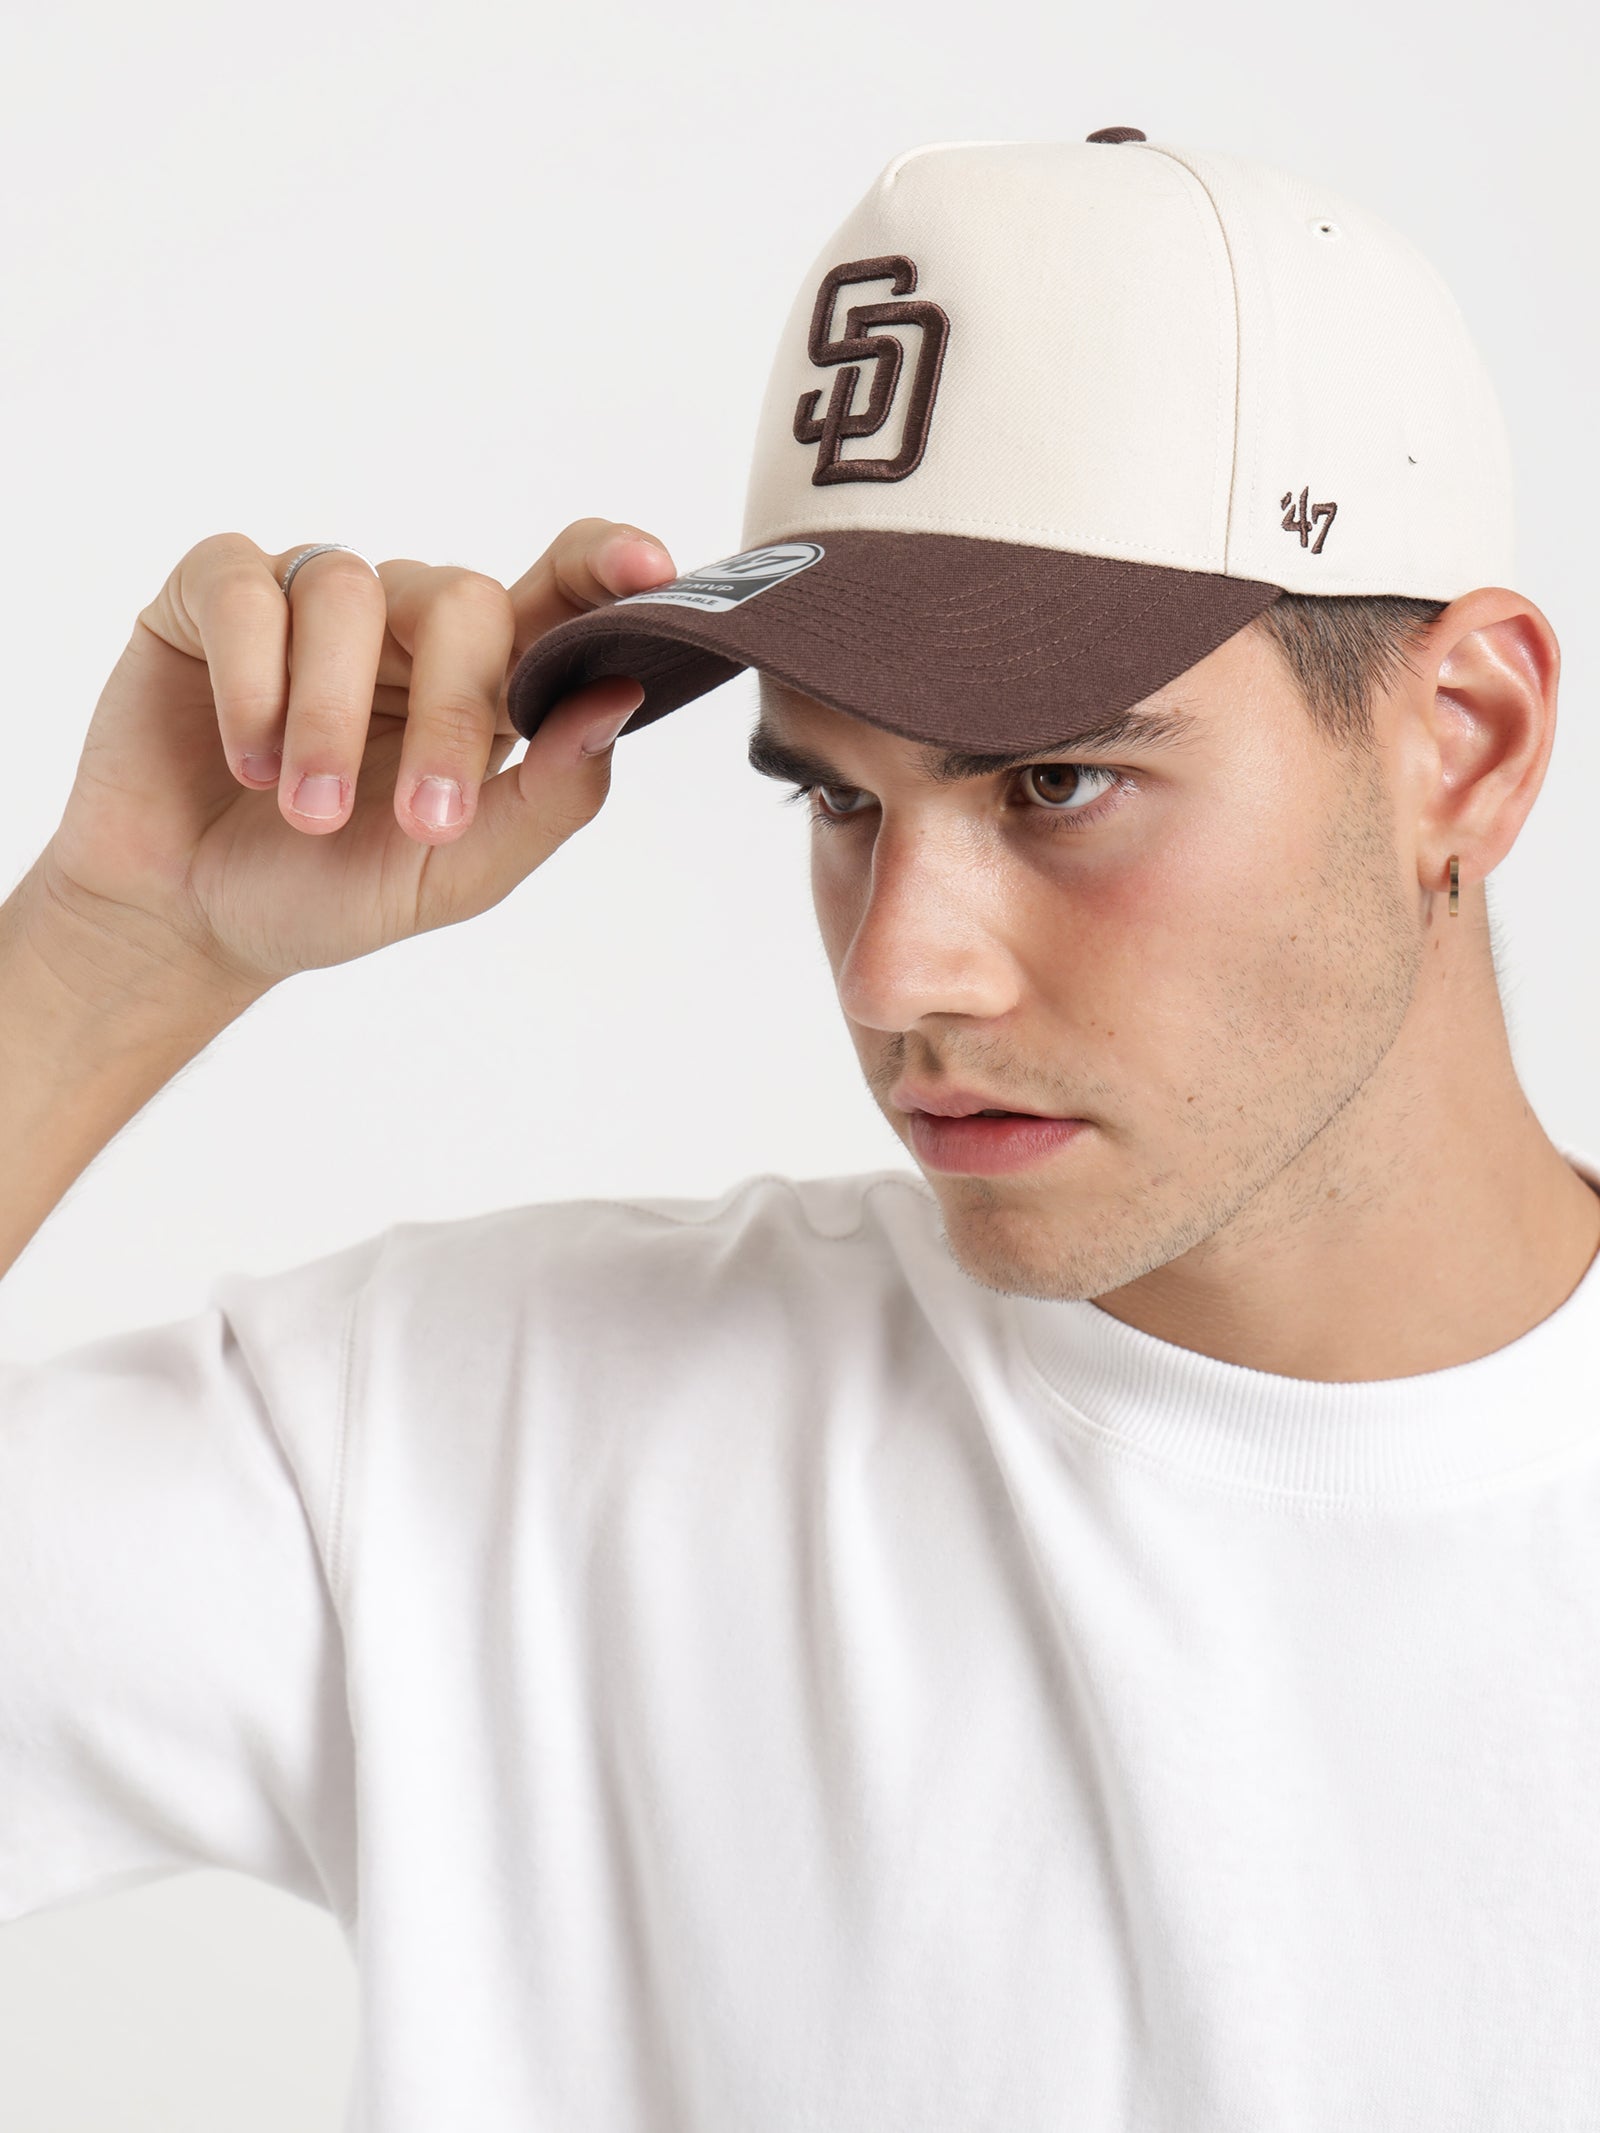 brown san diego padres hat outfit